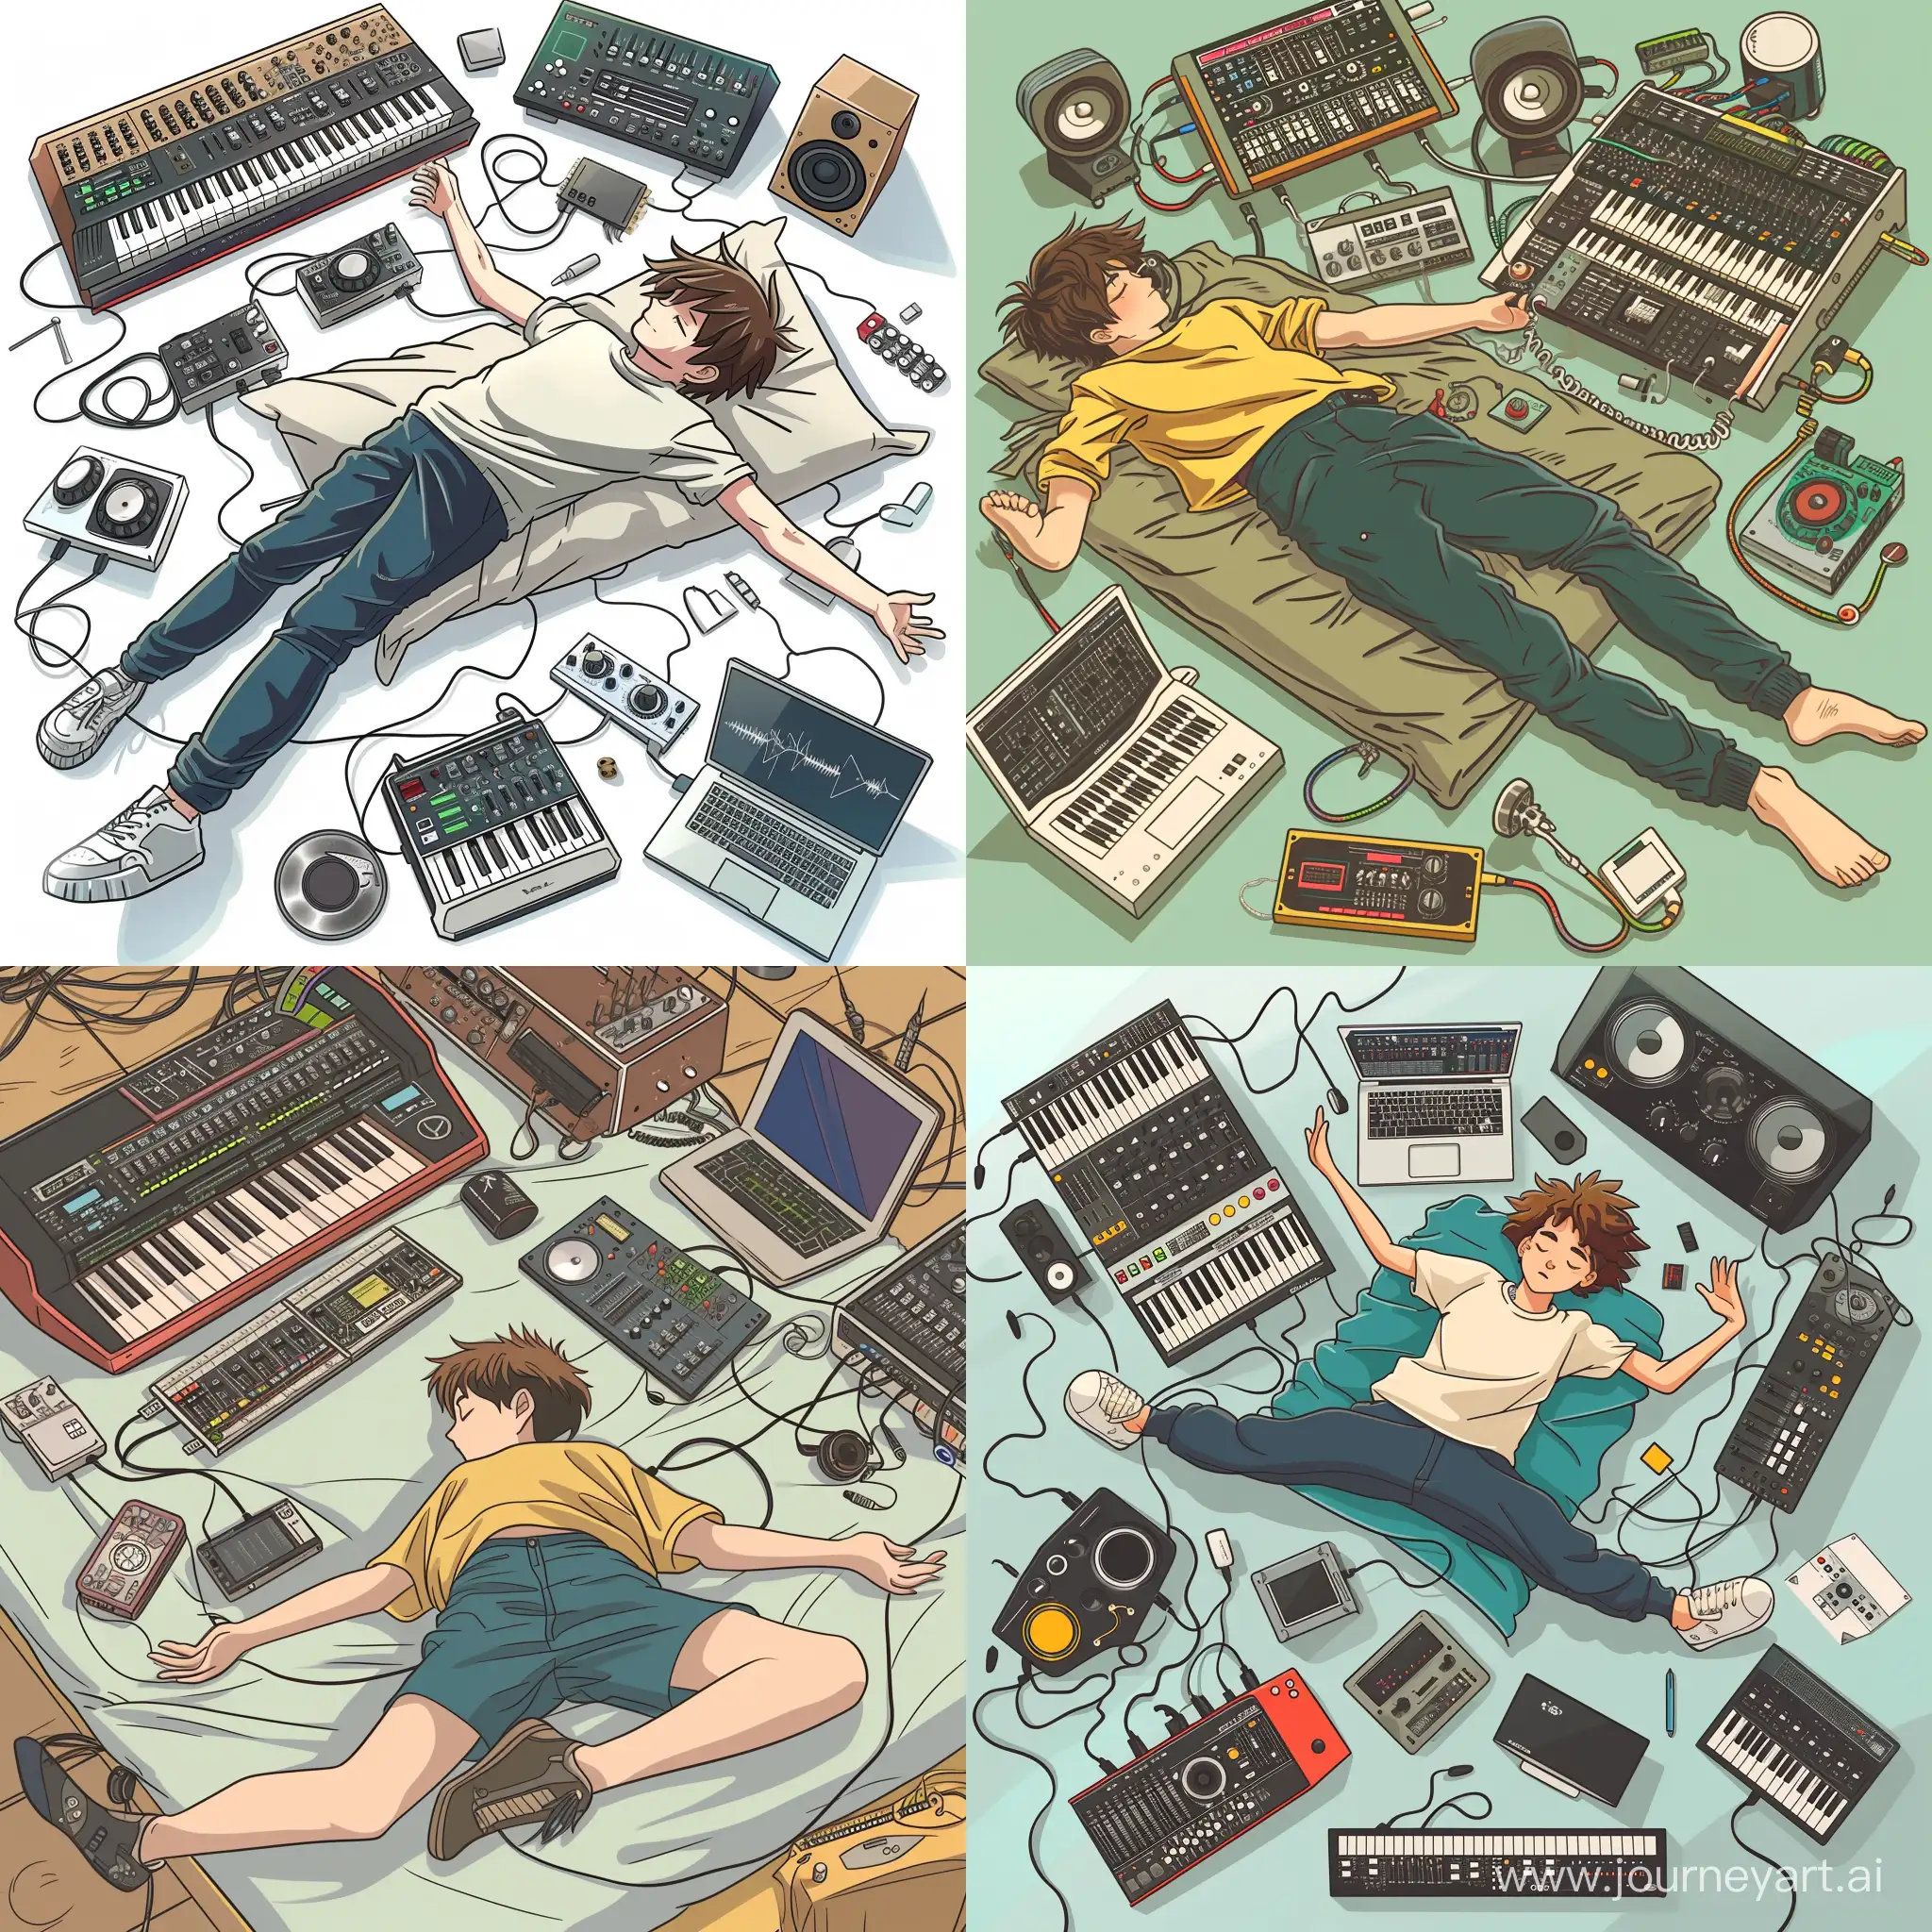 Cartoon-Student-Asleep-Surrounded-by-Radio-Components-on-Bed